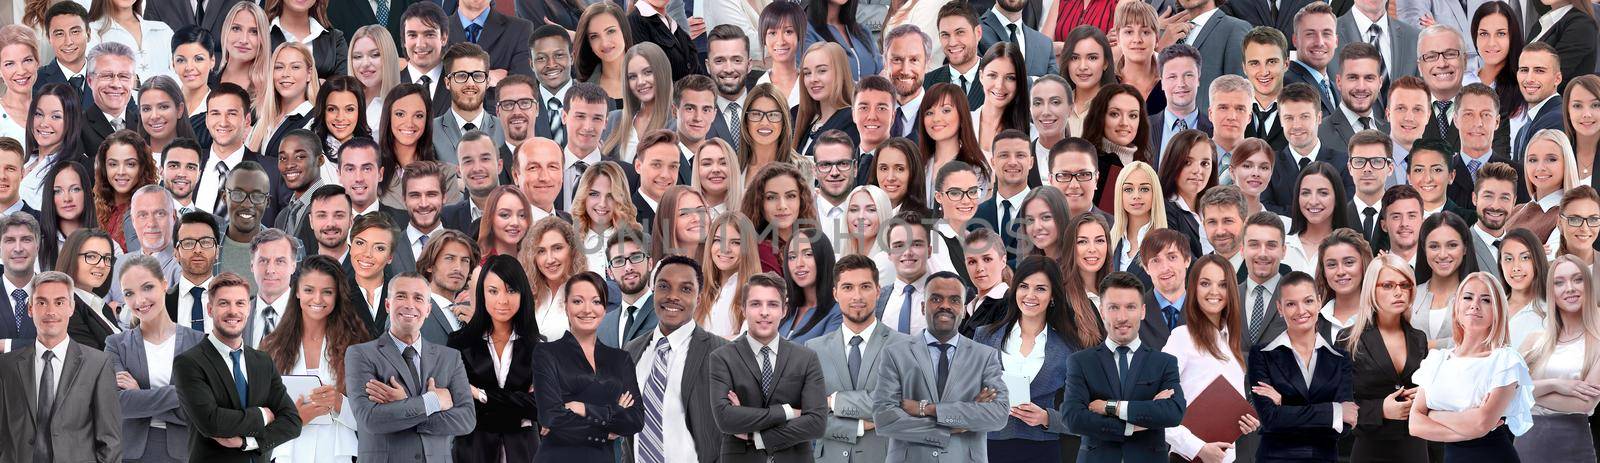 Business people group collage background by asdf